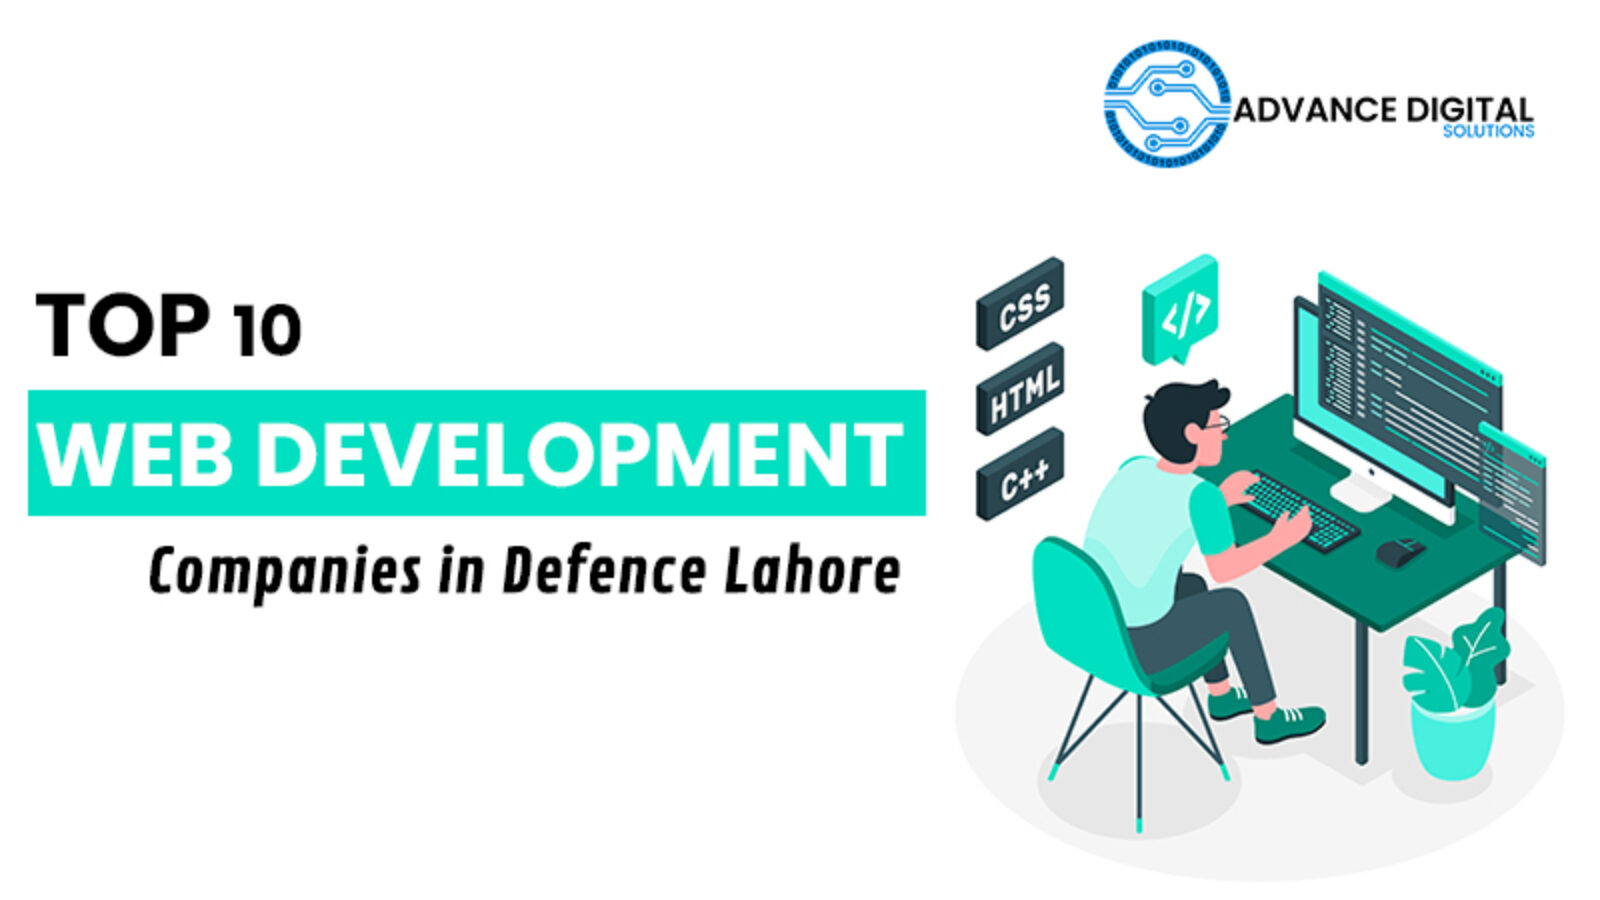 Top 10 Web Development Companies in Defence Lahore